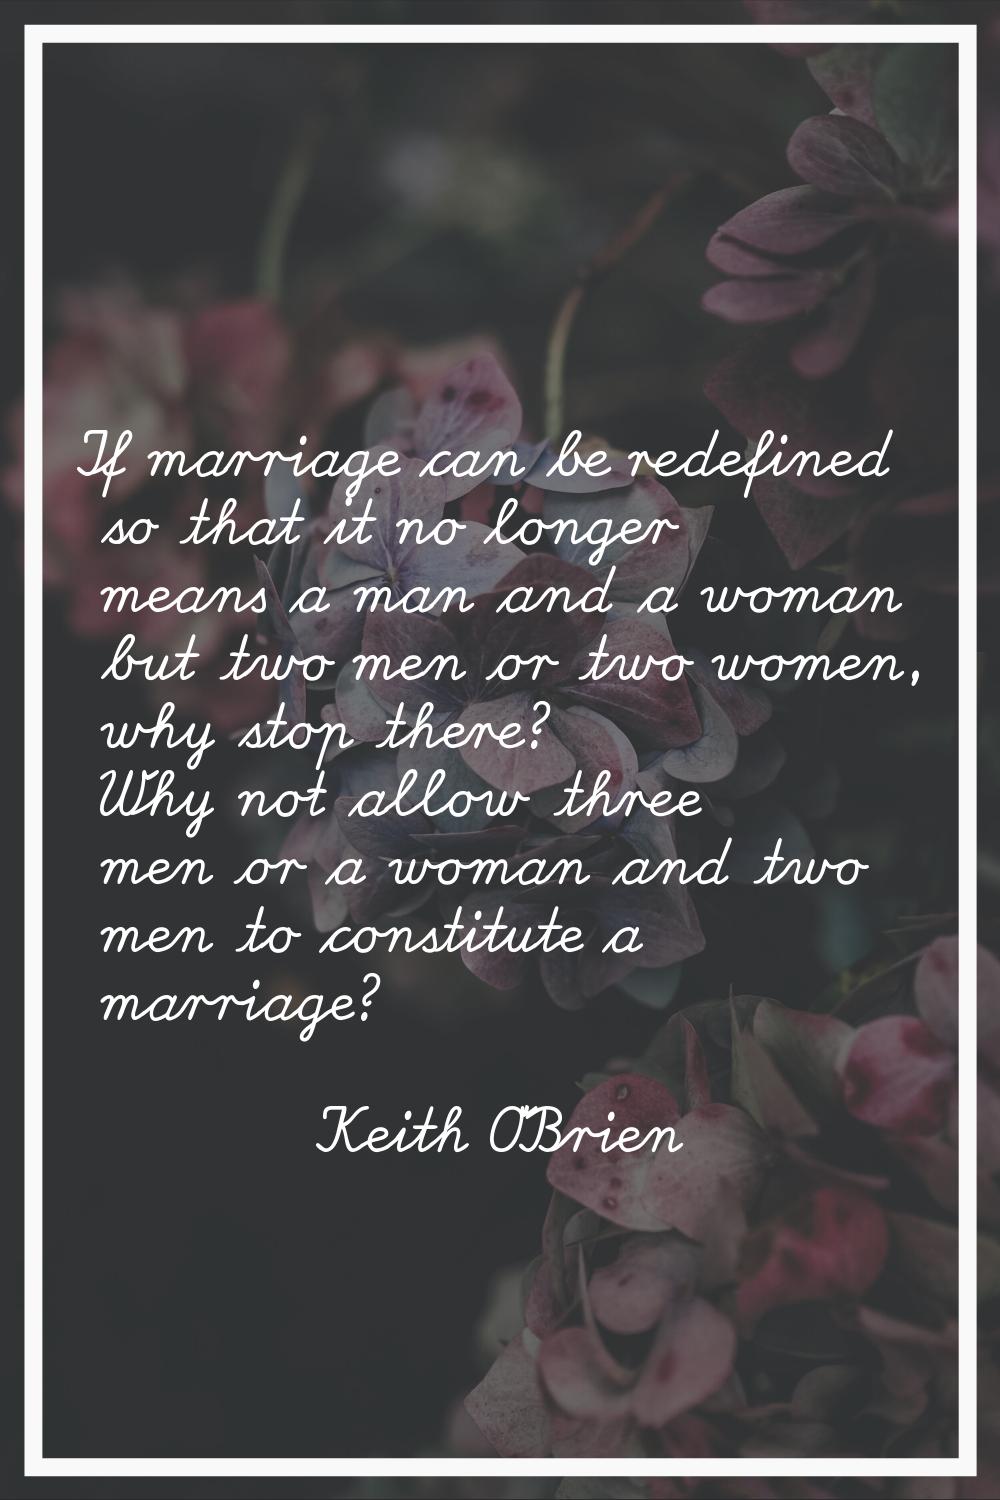 If marriage can be redefined so that it no longer means a man and a woman but two men or two women,